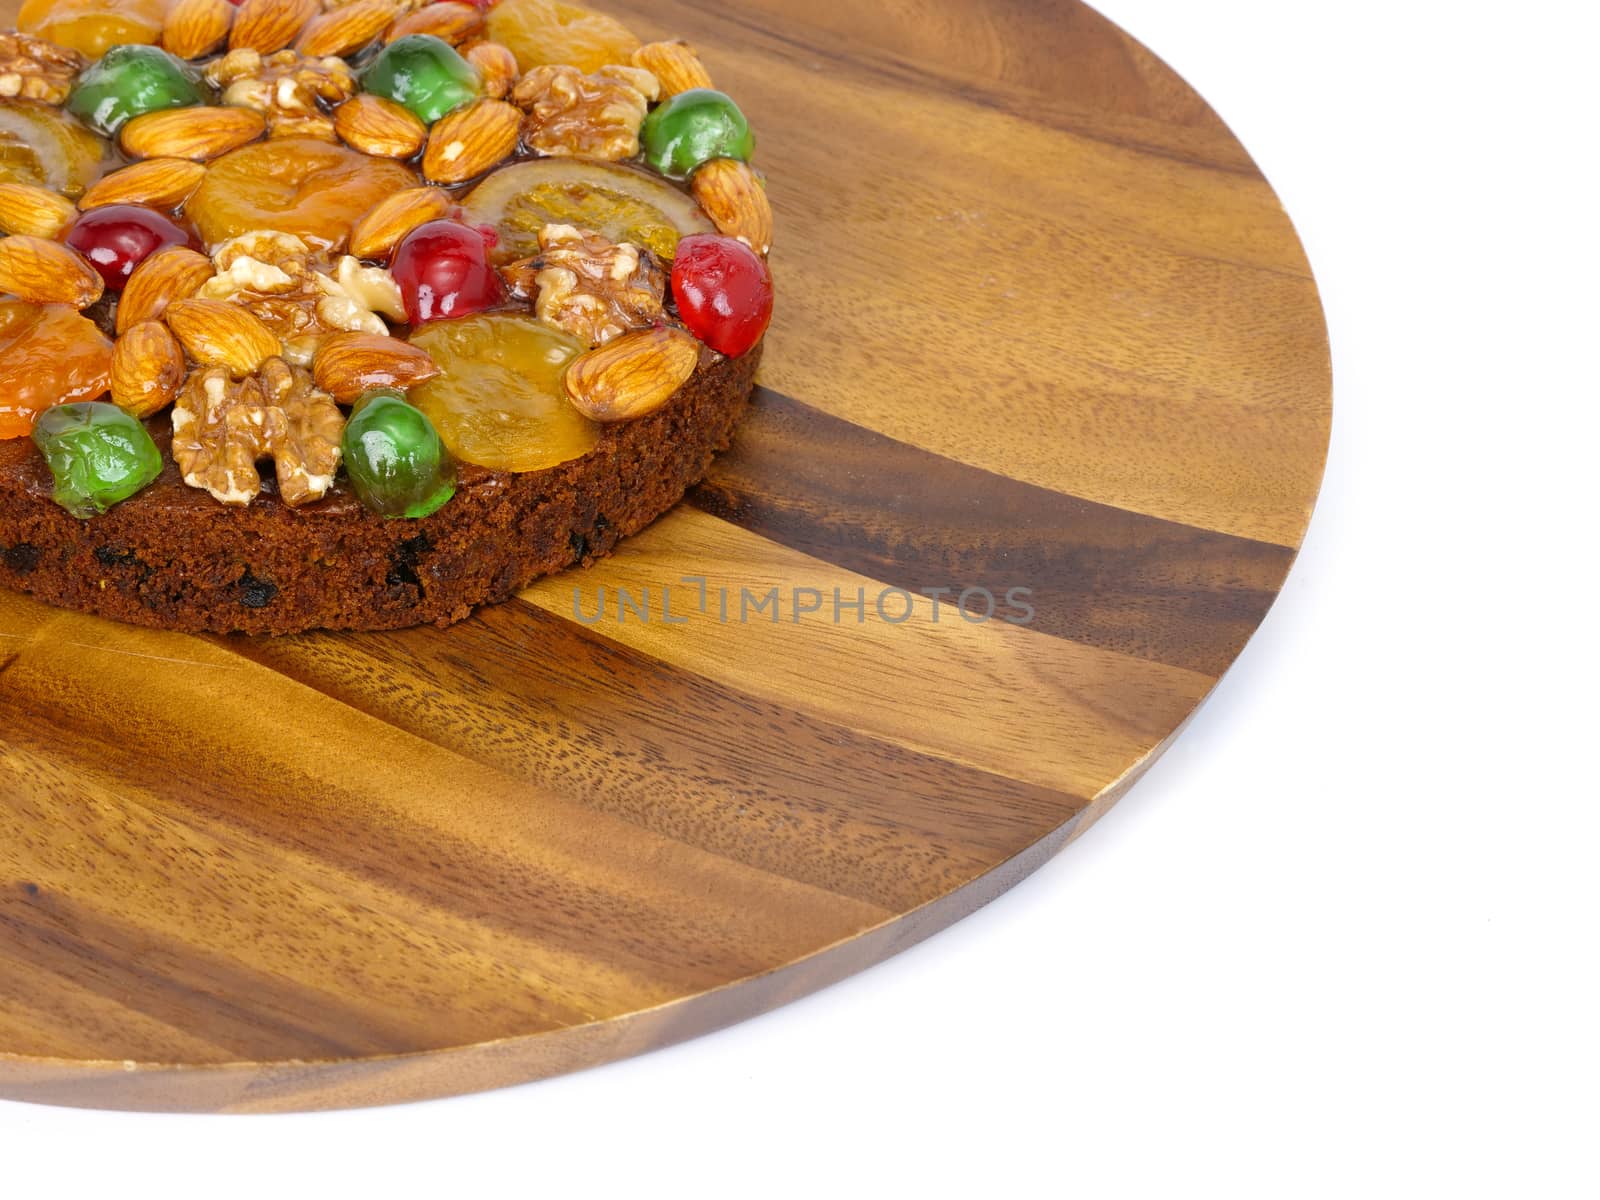 traditional fruitcake with fruits and nuts by Nawoot